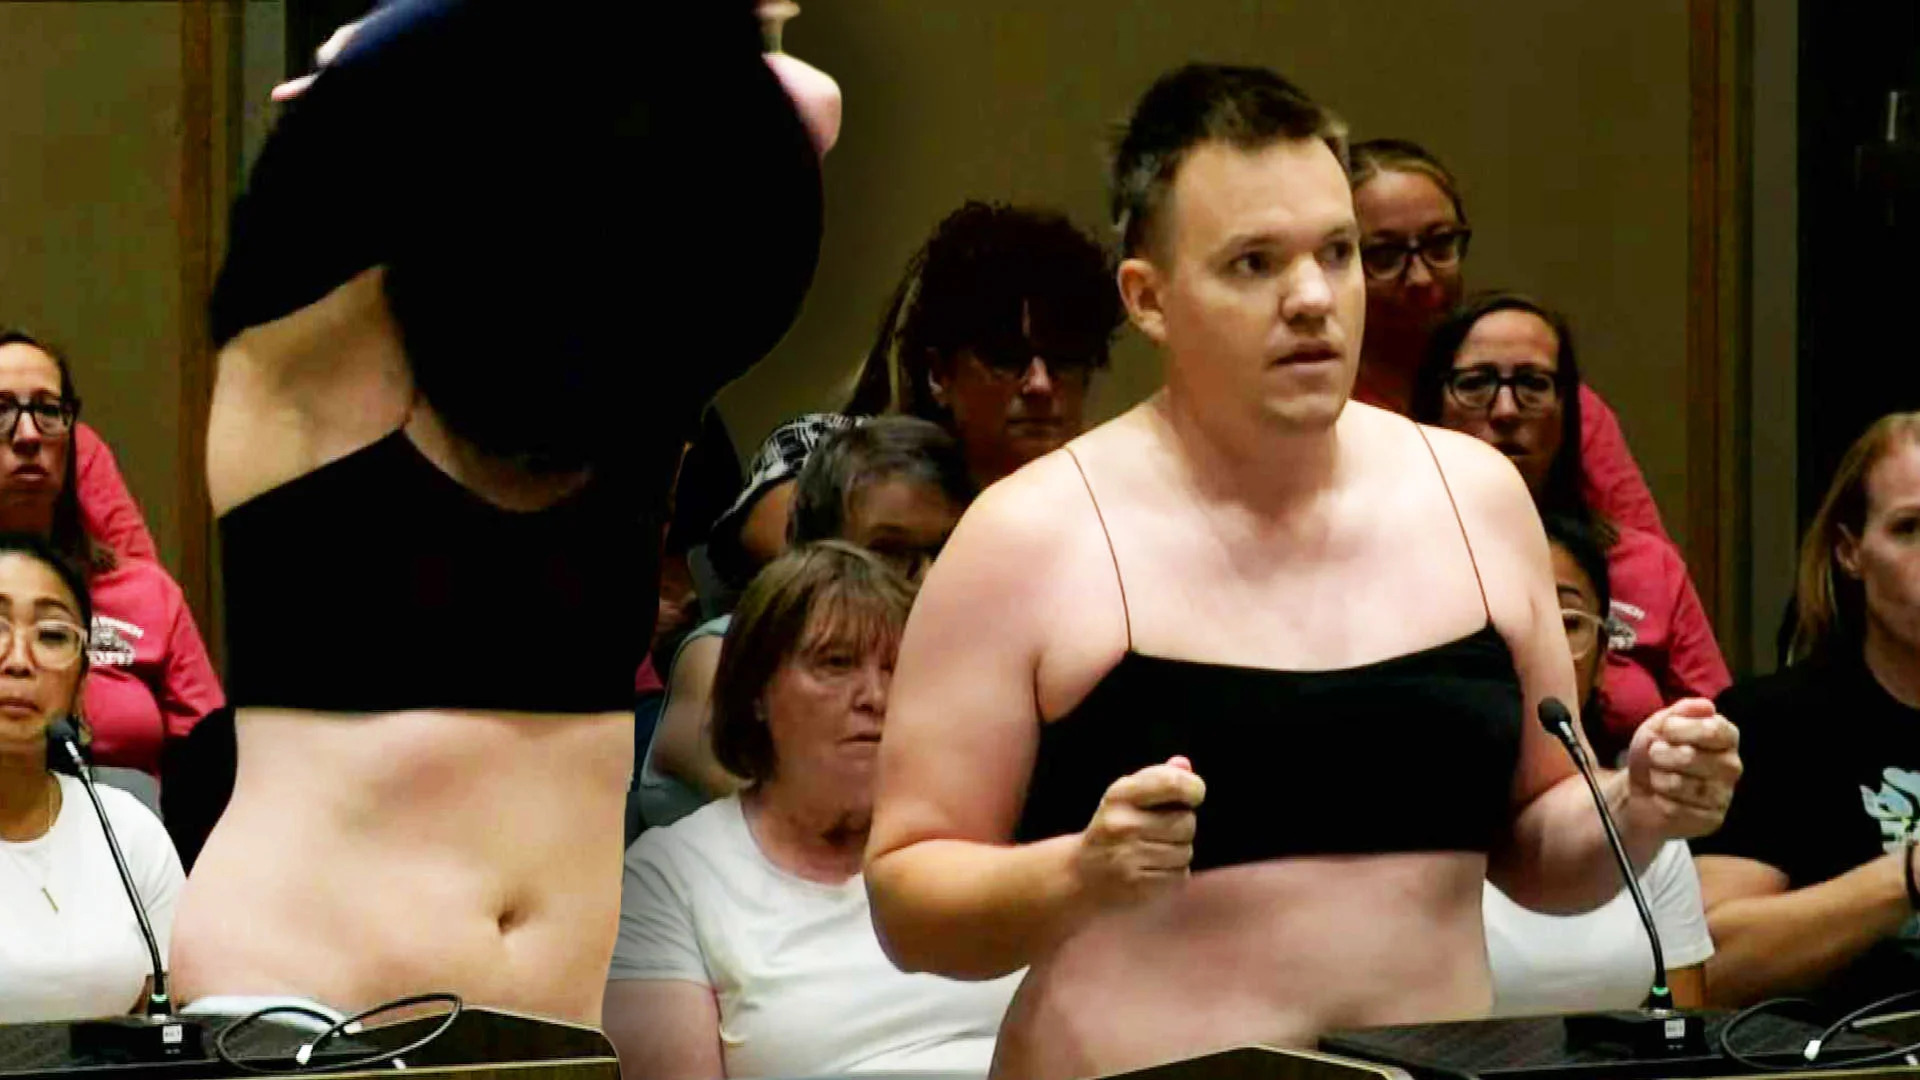 American Father Strips To Crop Top To Protest Dress Code In Meeting